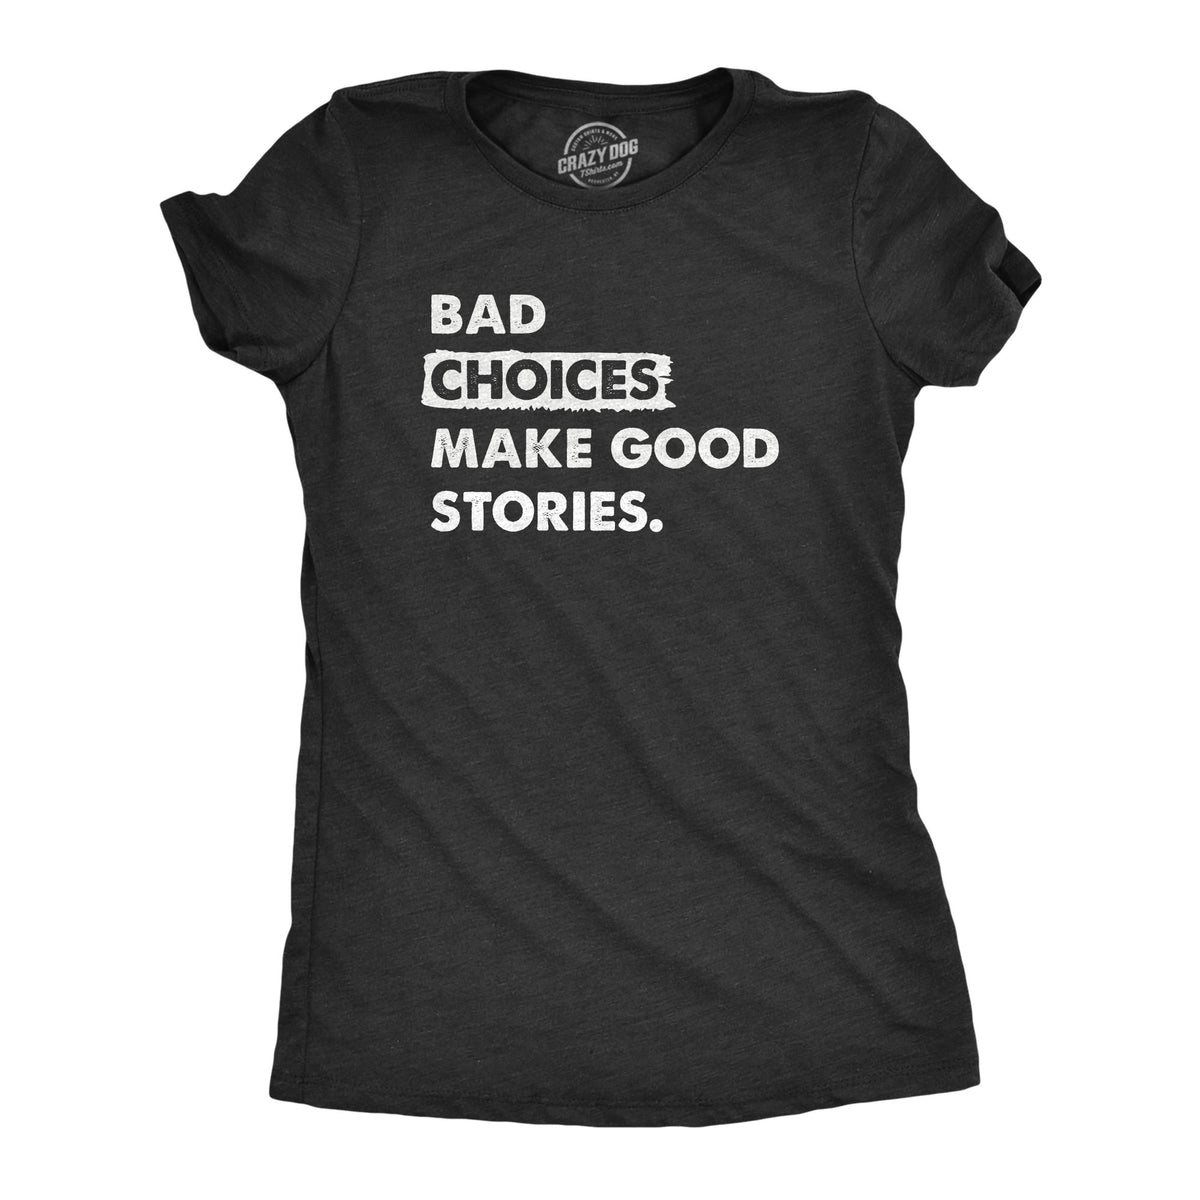 Funny Heather Black - BADCHOICES Bad Choices Make Good Stories Womens T Shirt Nerdy Sarcastic Tee